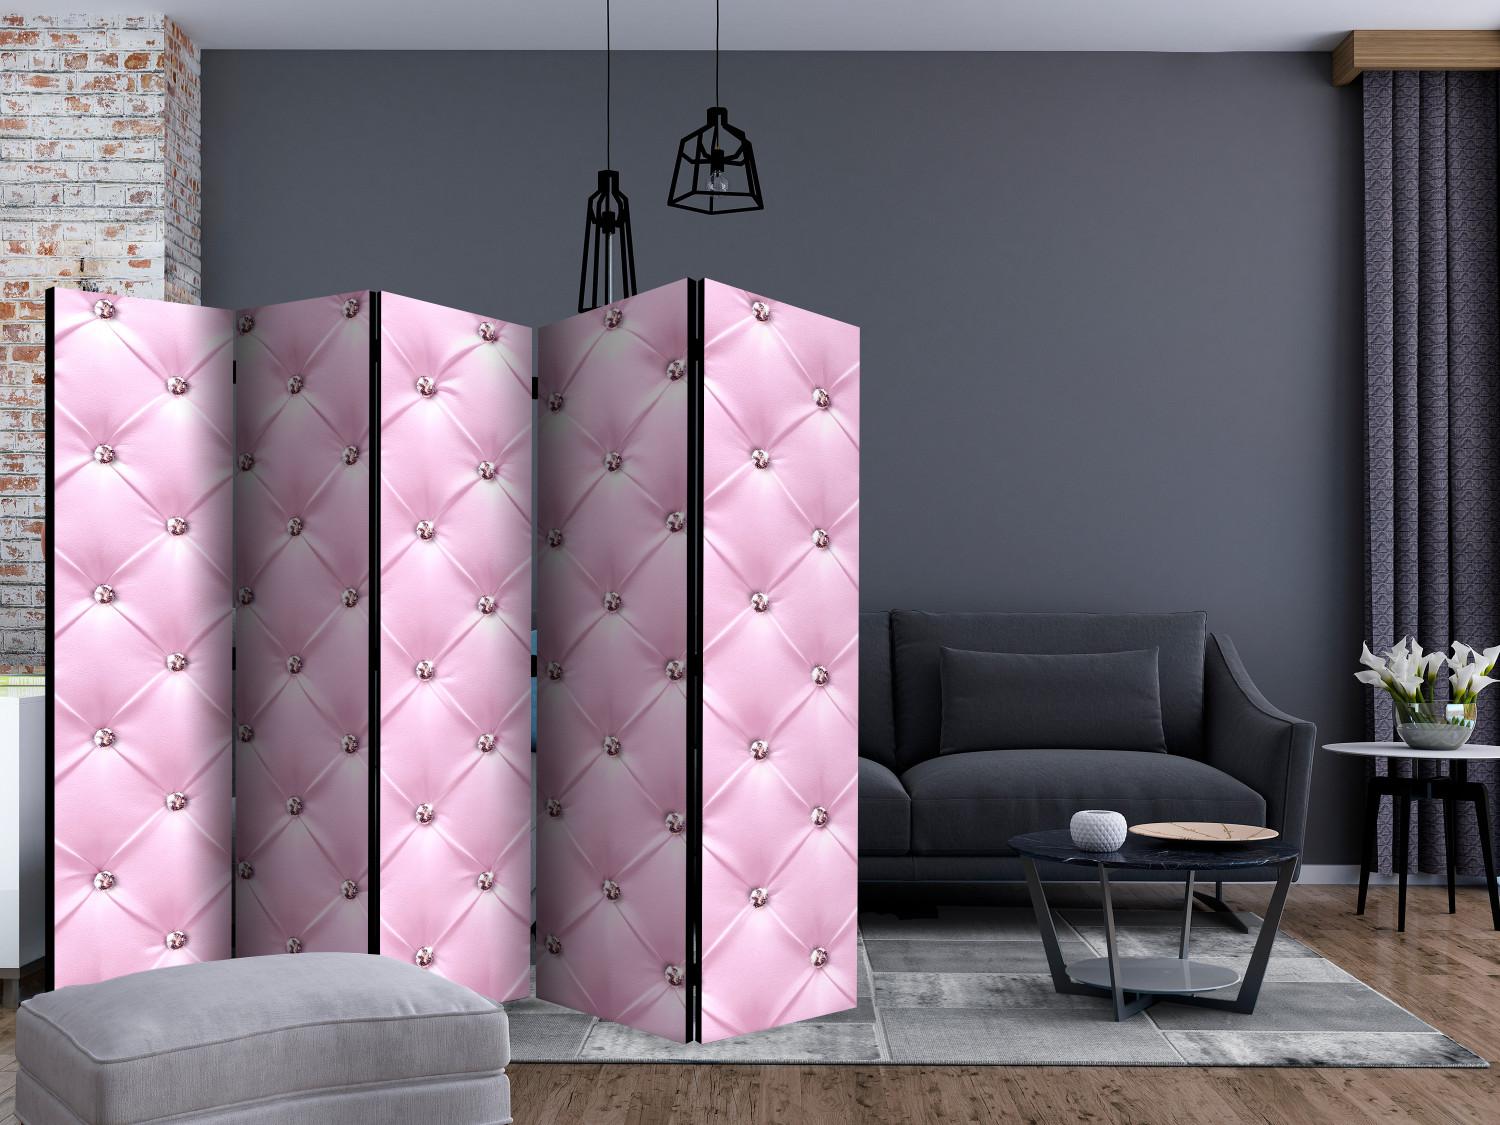 Room Divider Pink Lady II (5-piece) - composition adorned with small crystals